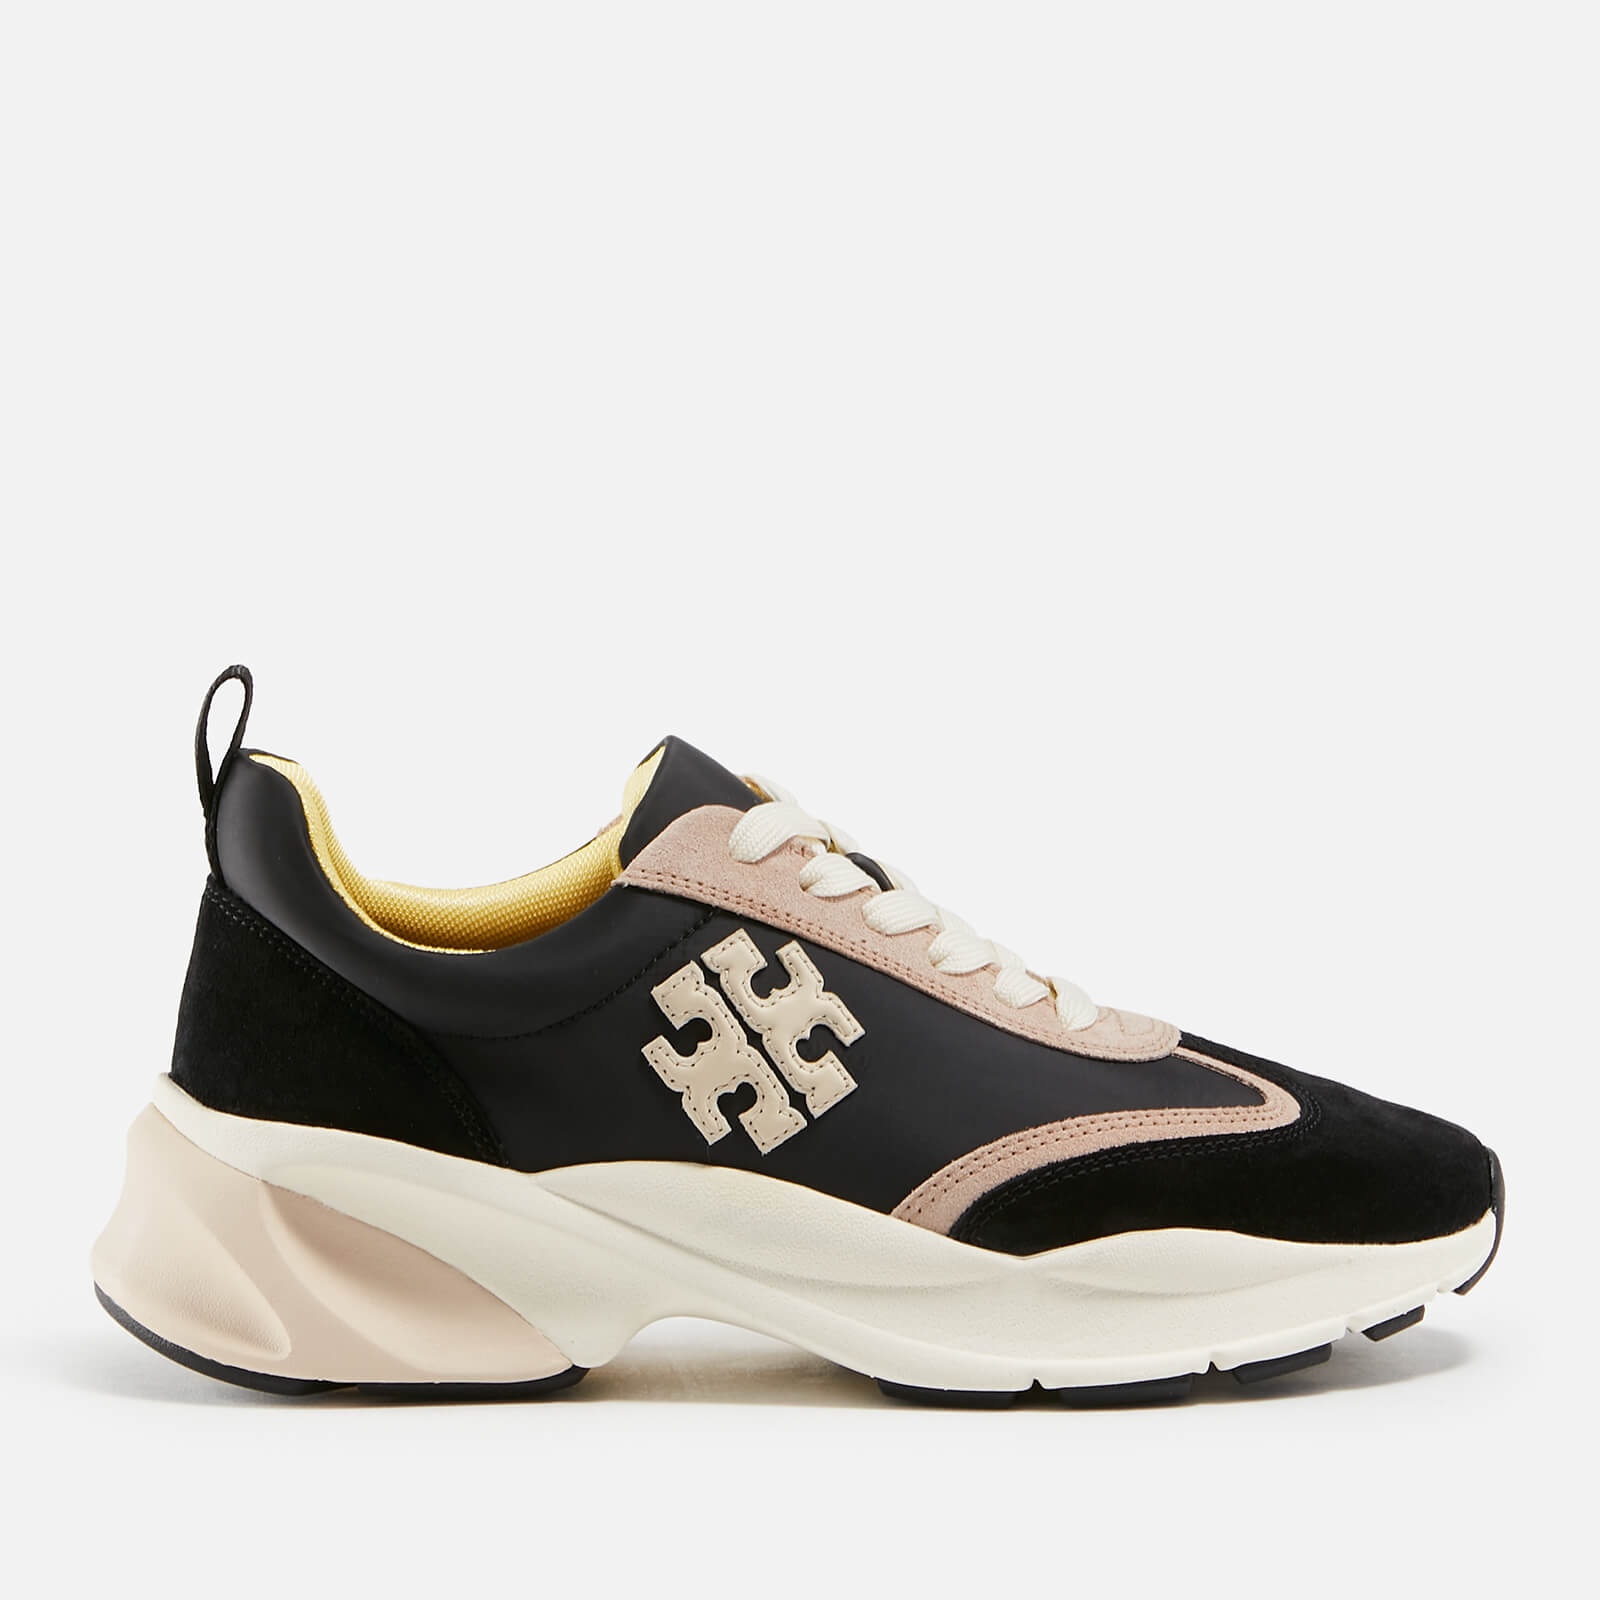 Tory Burch Good Luck Nylon and Suede Running-Style Trainers